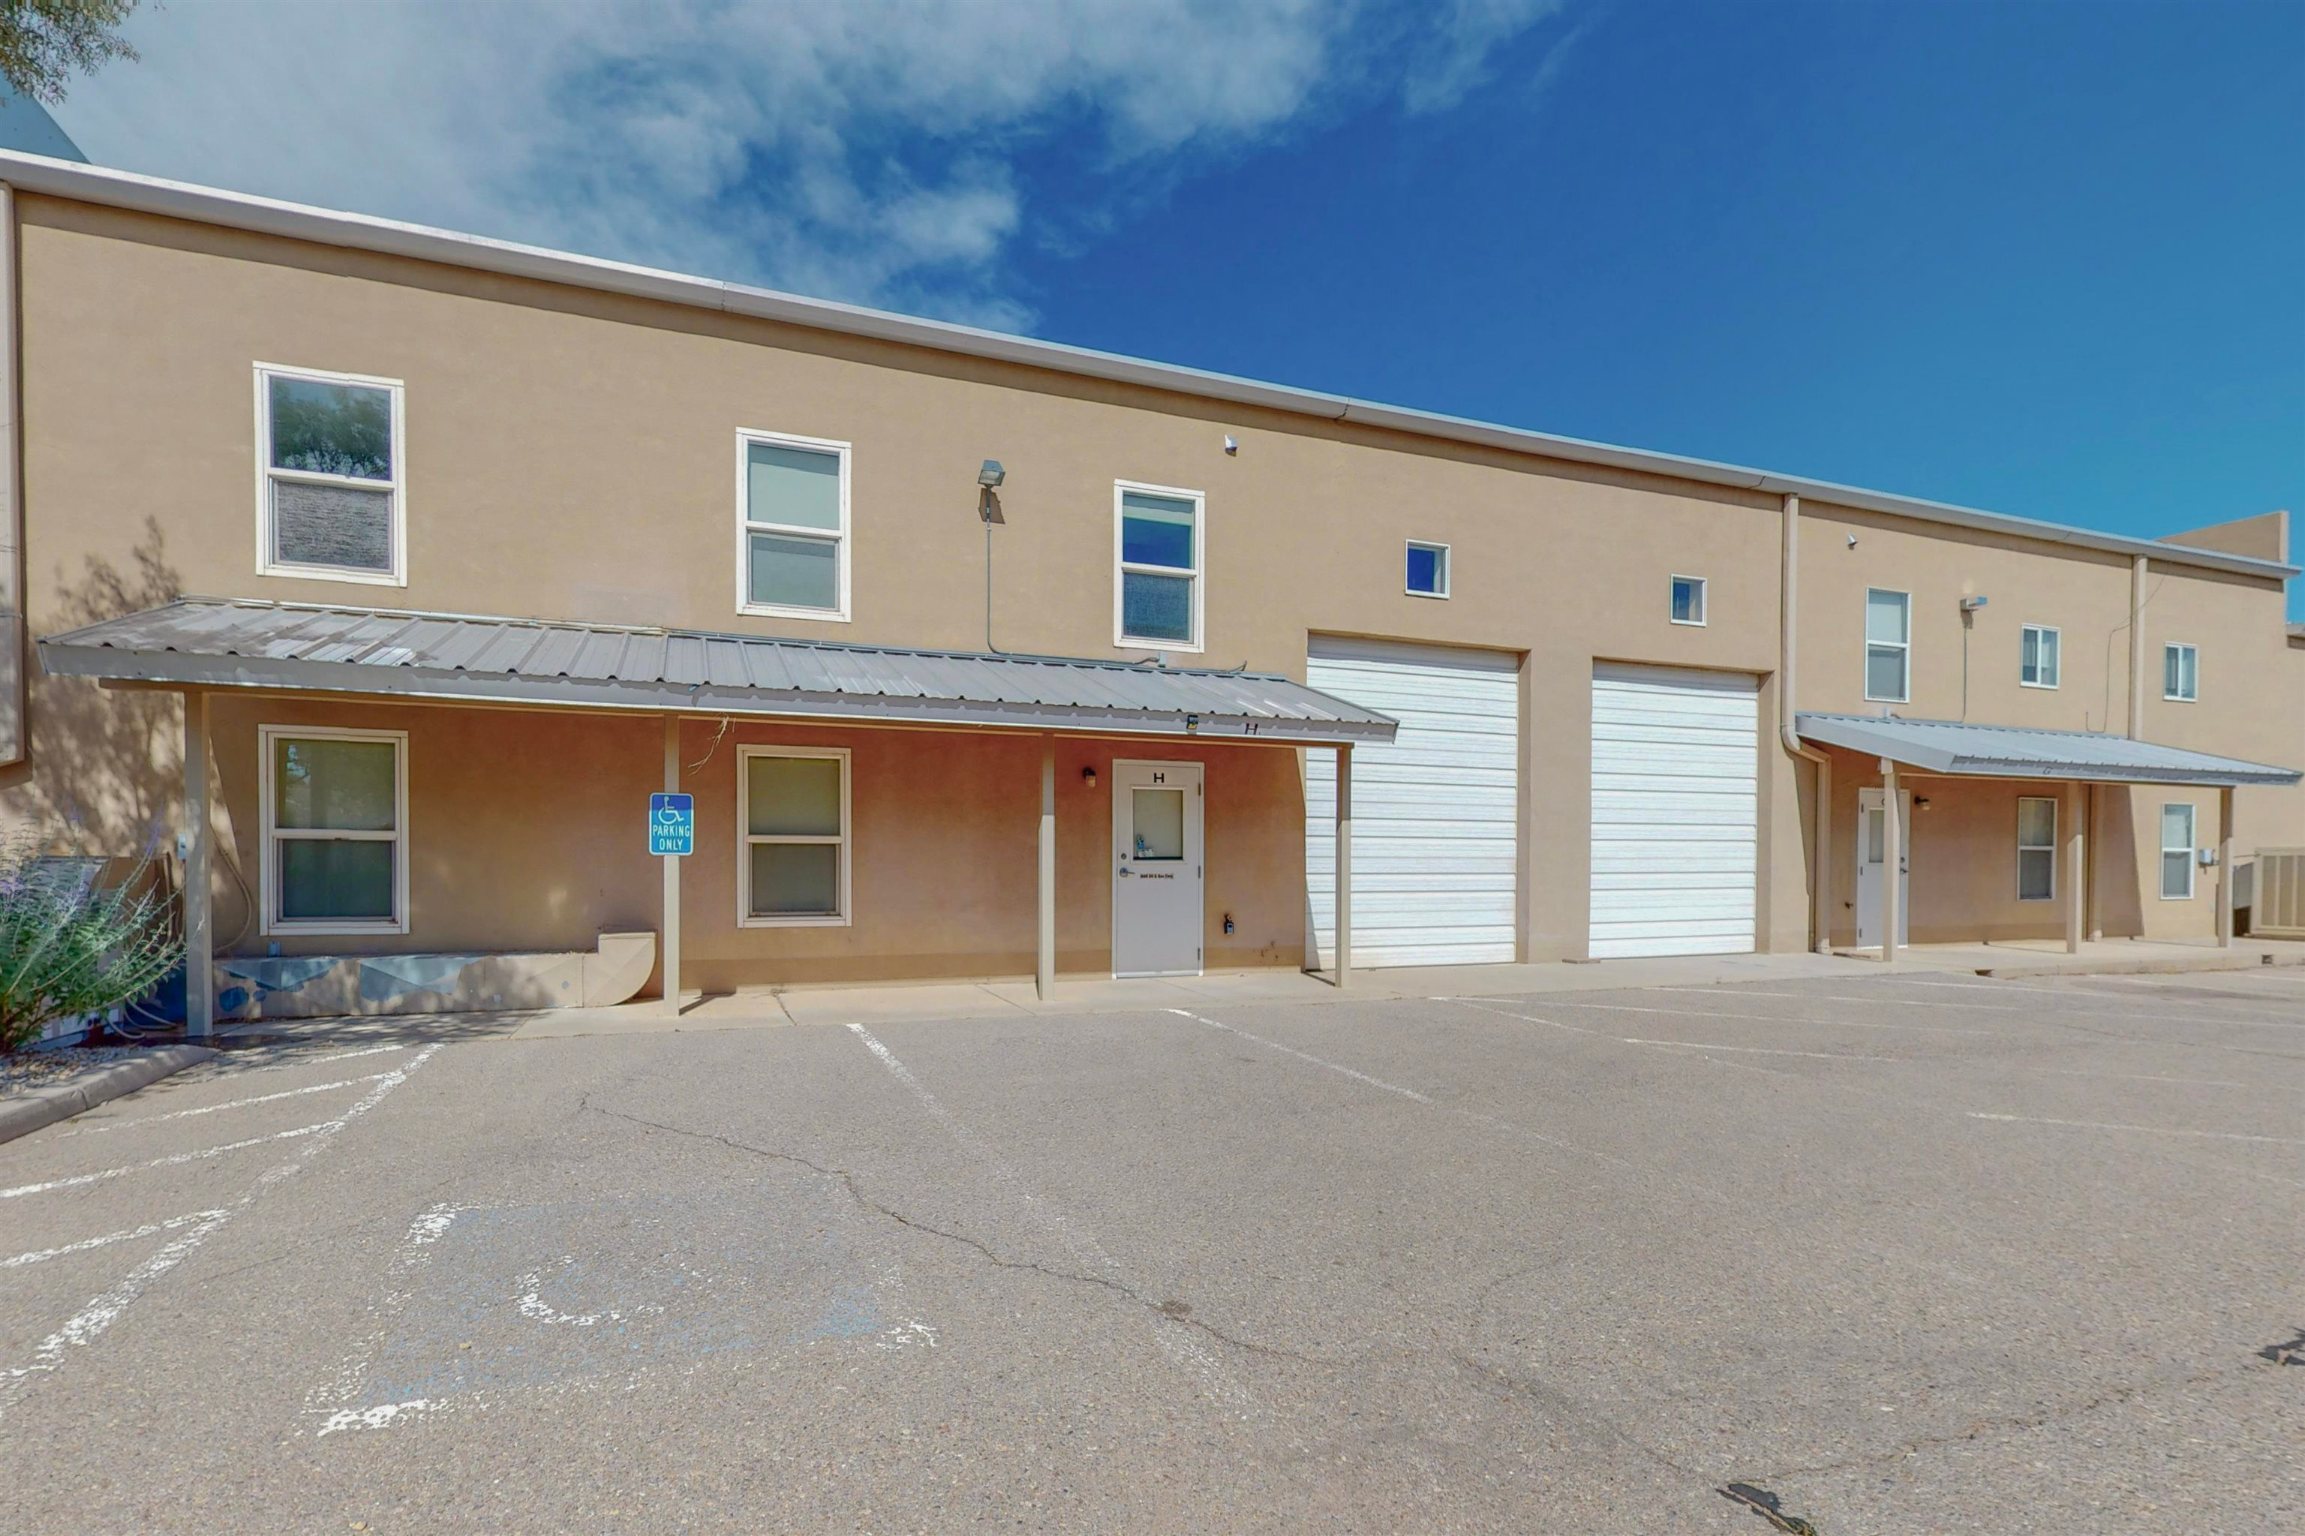 21 BISBEE H, Santa Fe, New Mexico 87508, ,Commercial Sale,For Sale,21 BISBEE H,202202399